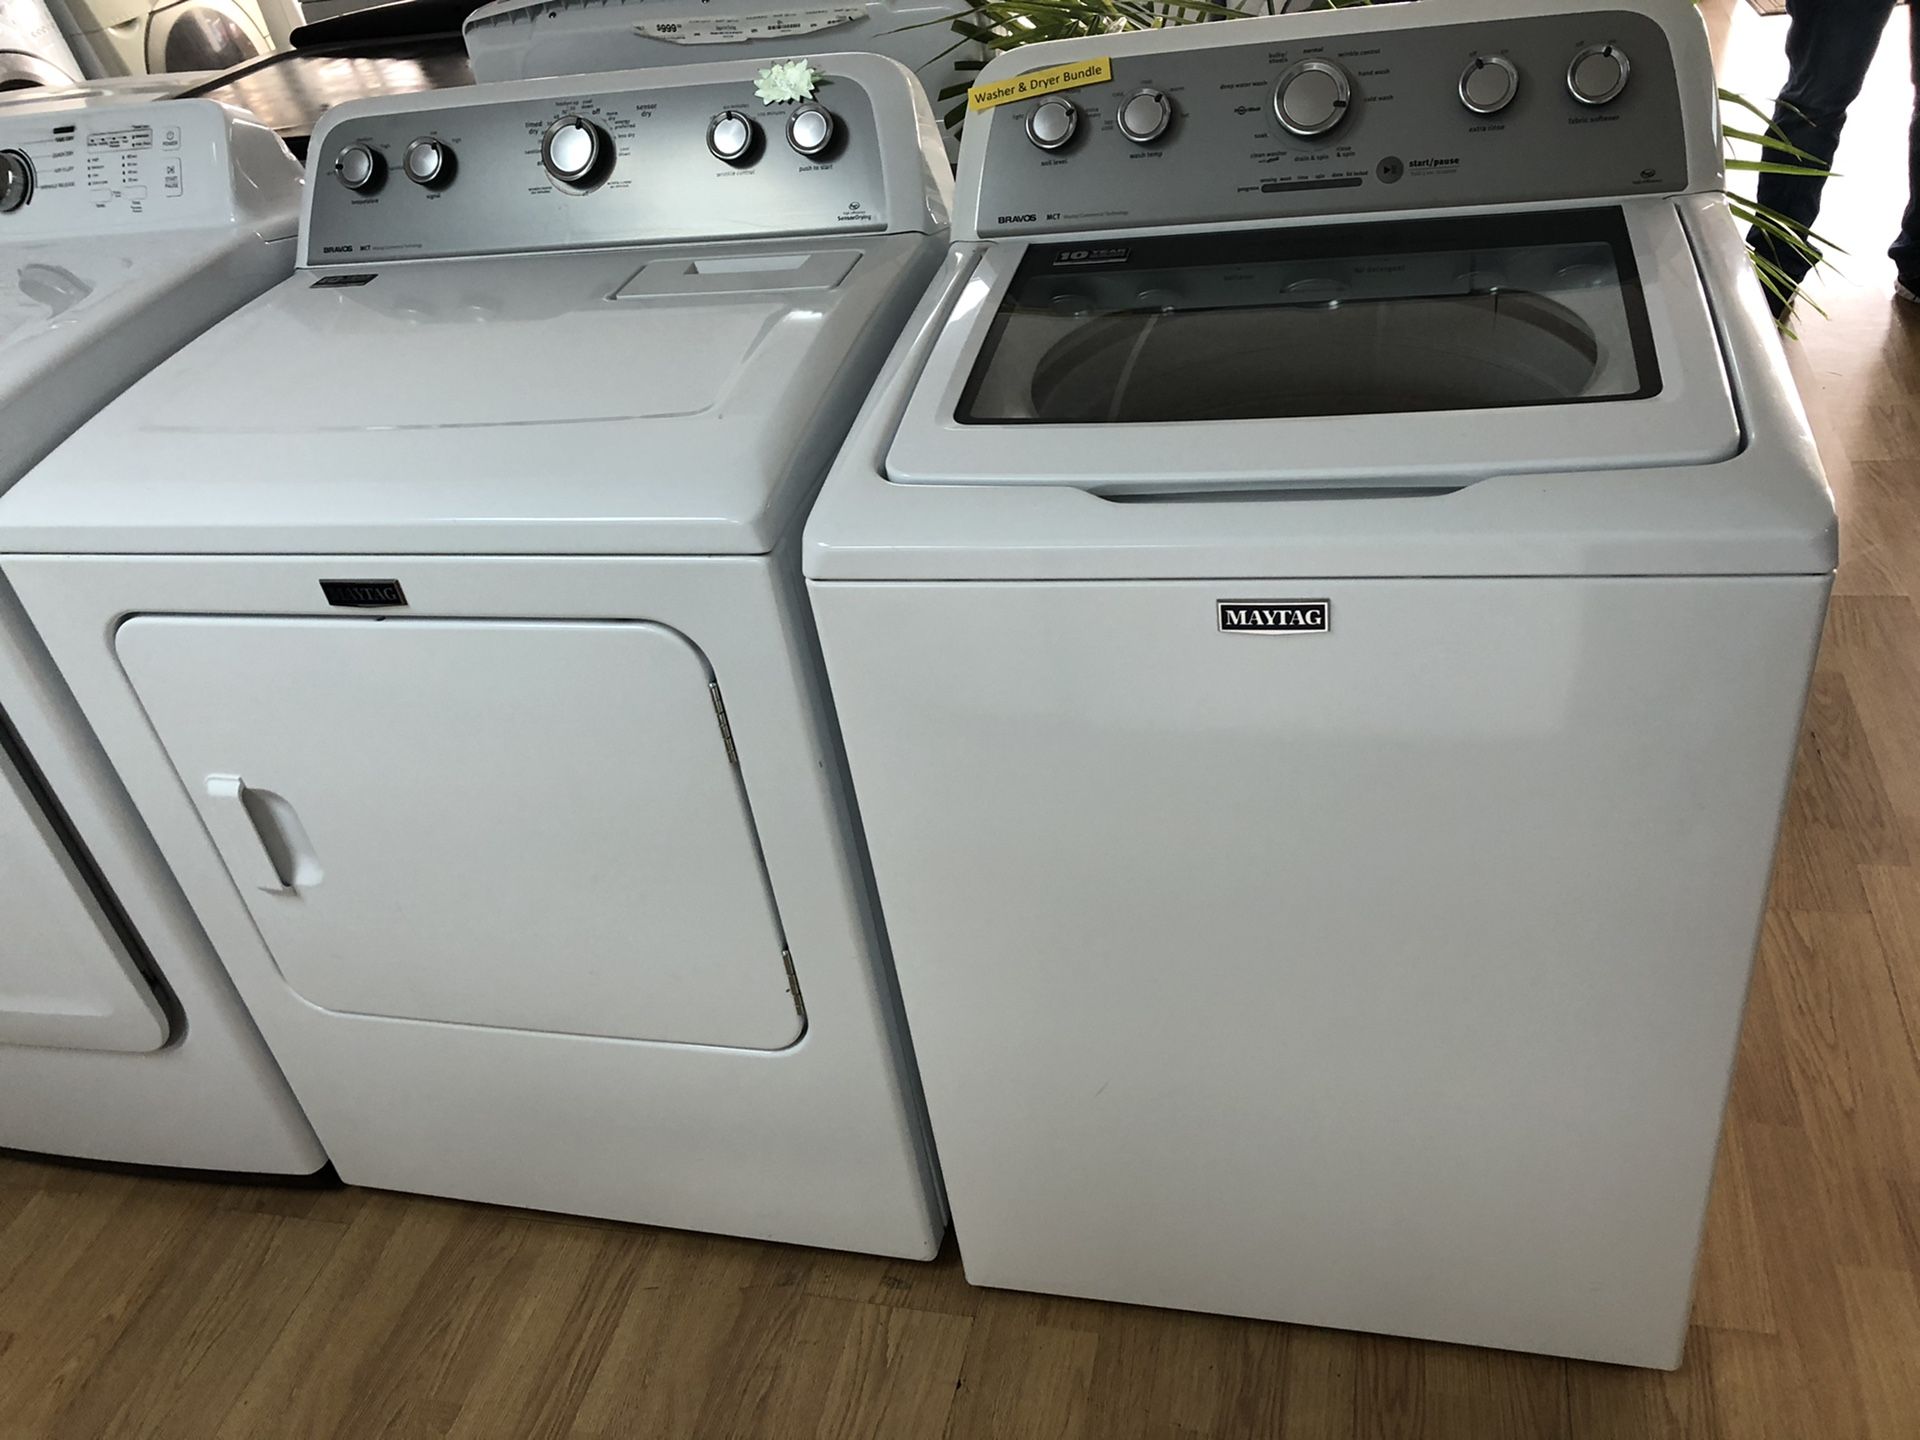 Maytag white washer and dryer set